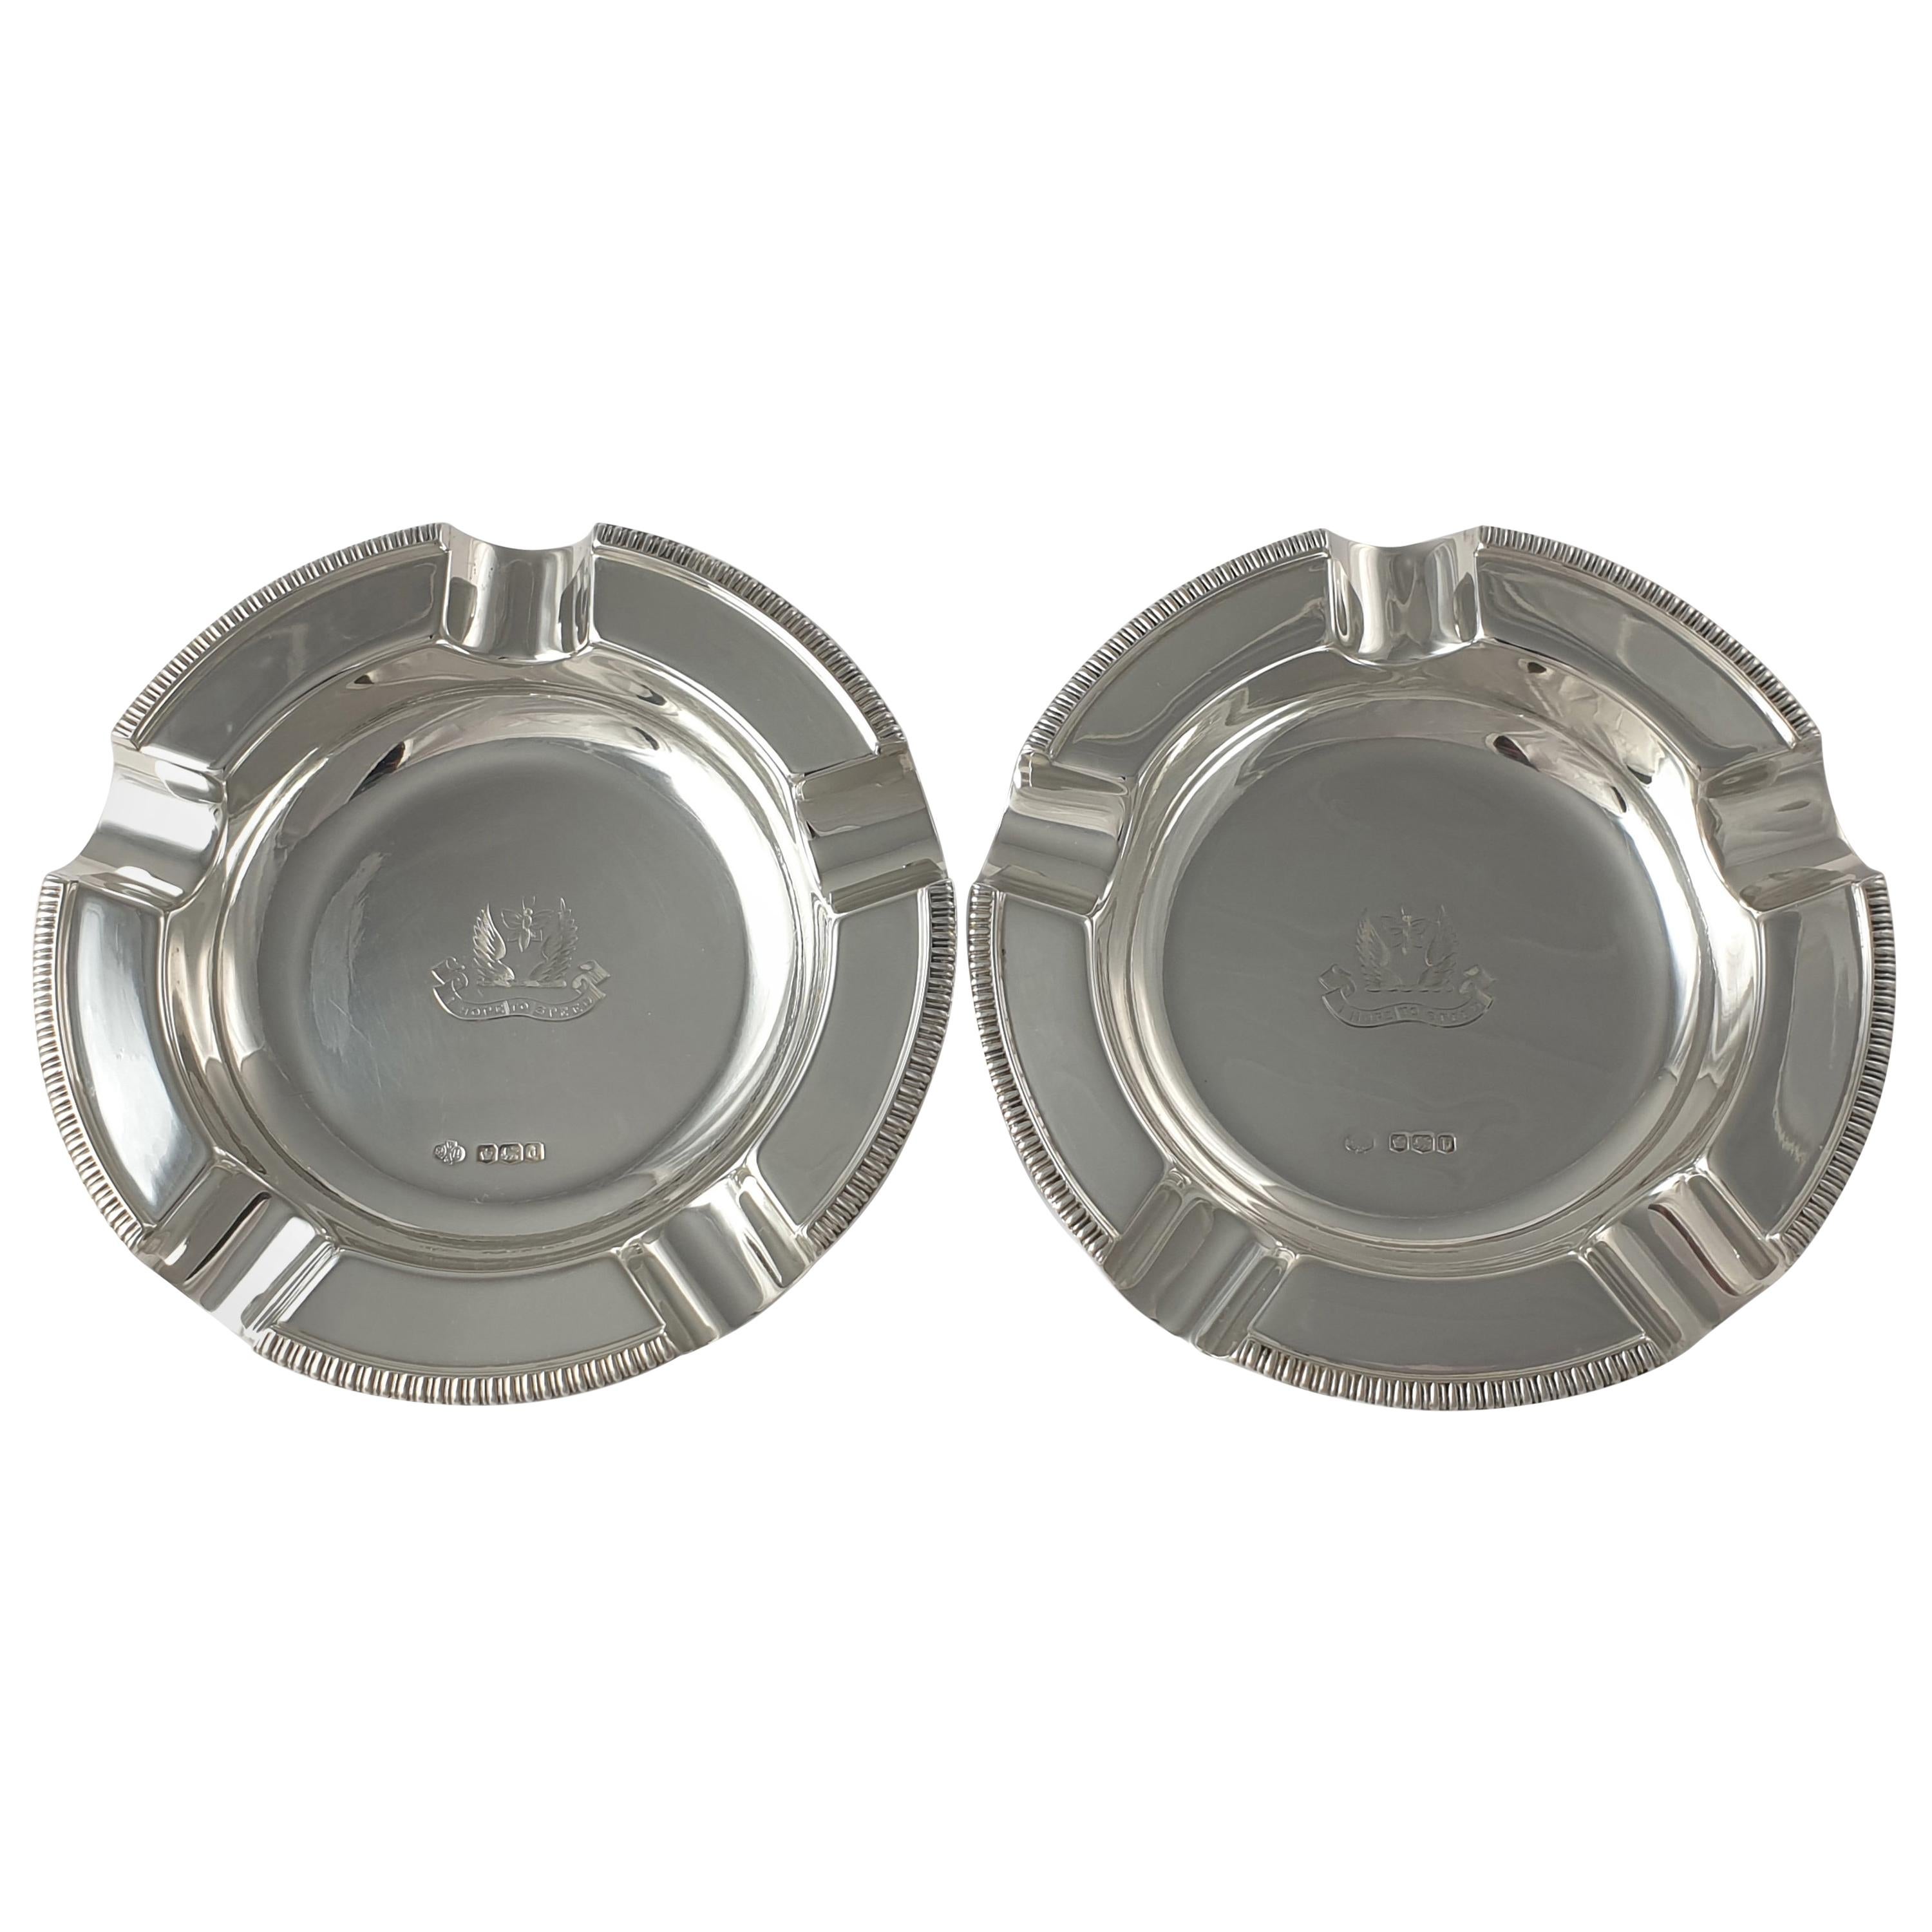 Pair of Sterling Silver Crested Ashtrays, William Hutton & Sons